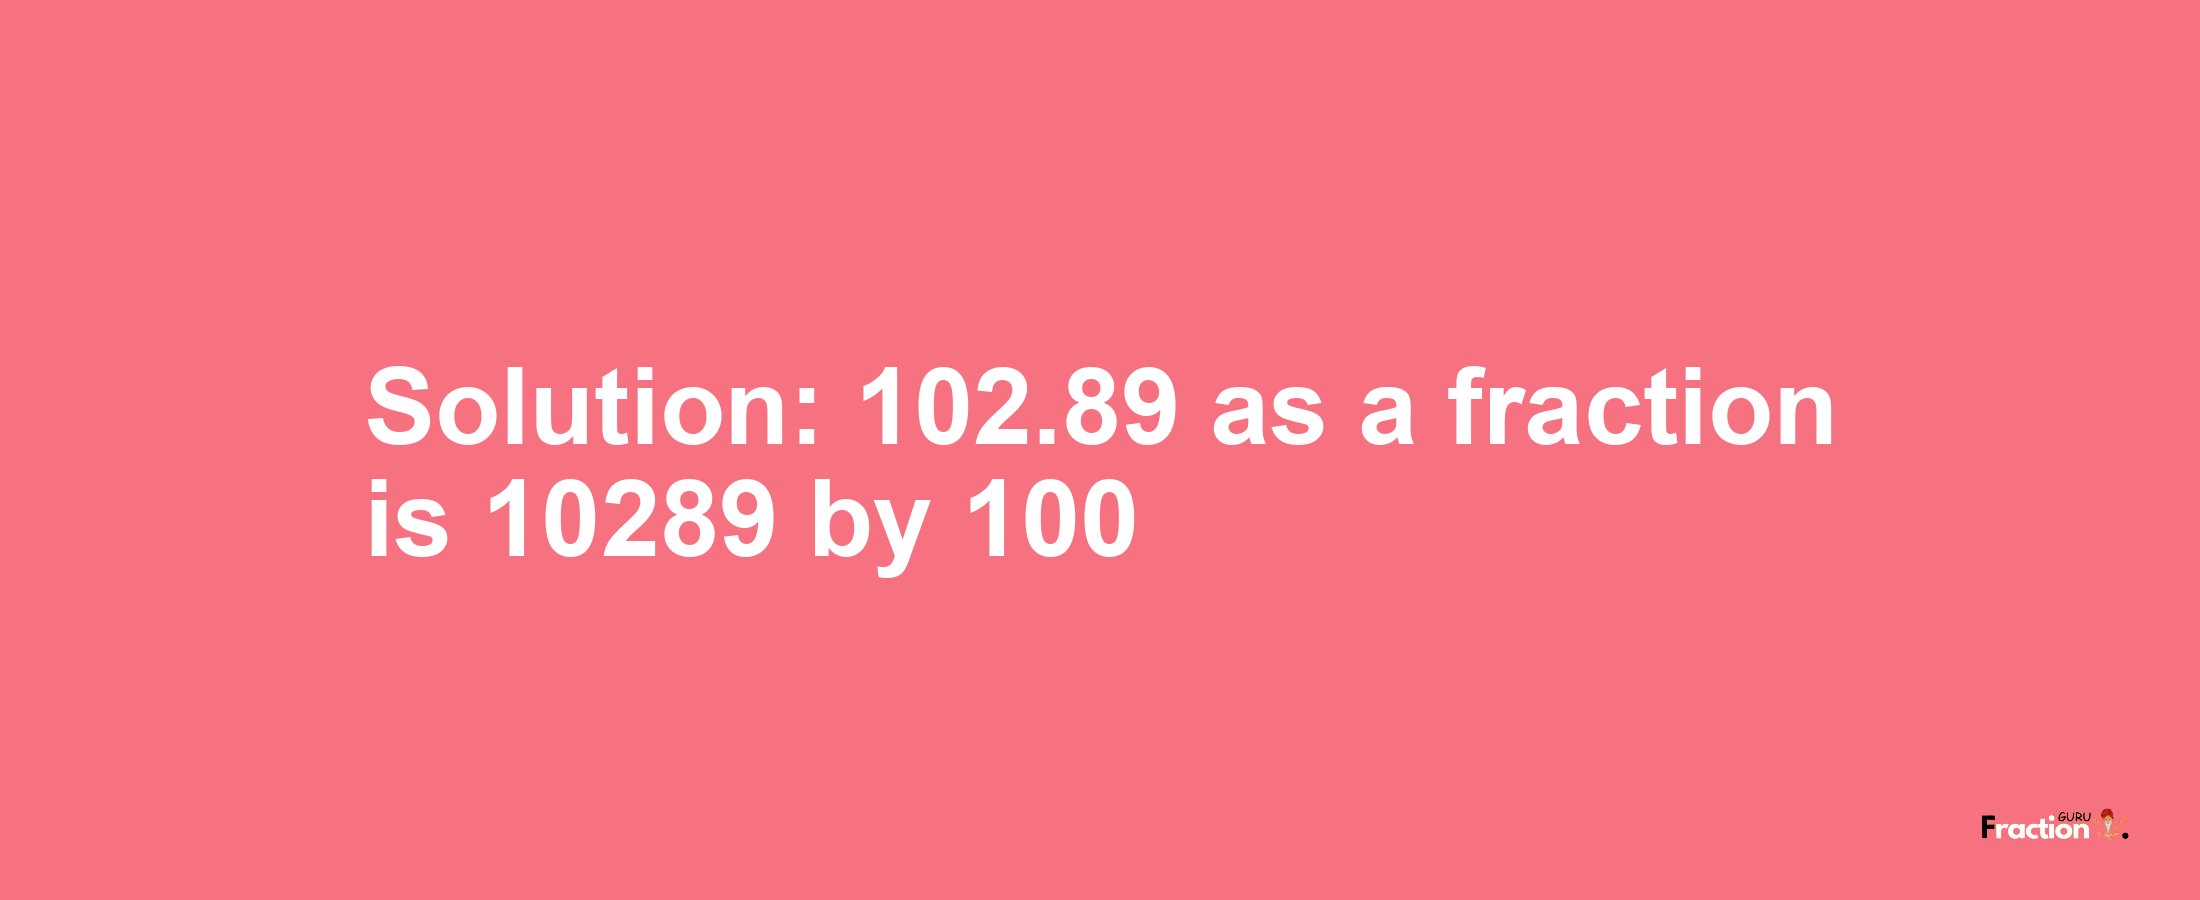 Solution:102.89 as a fraction is 10289/100